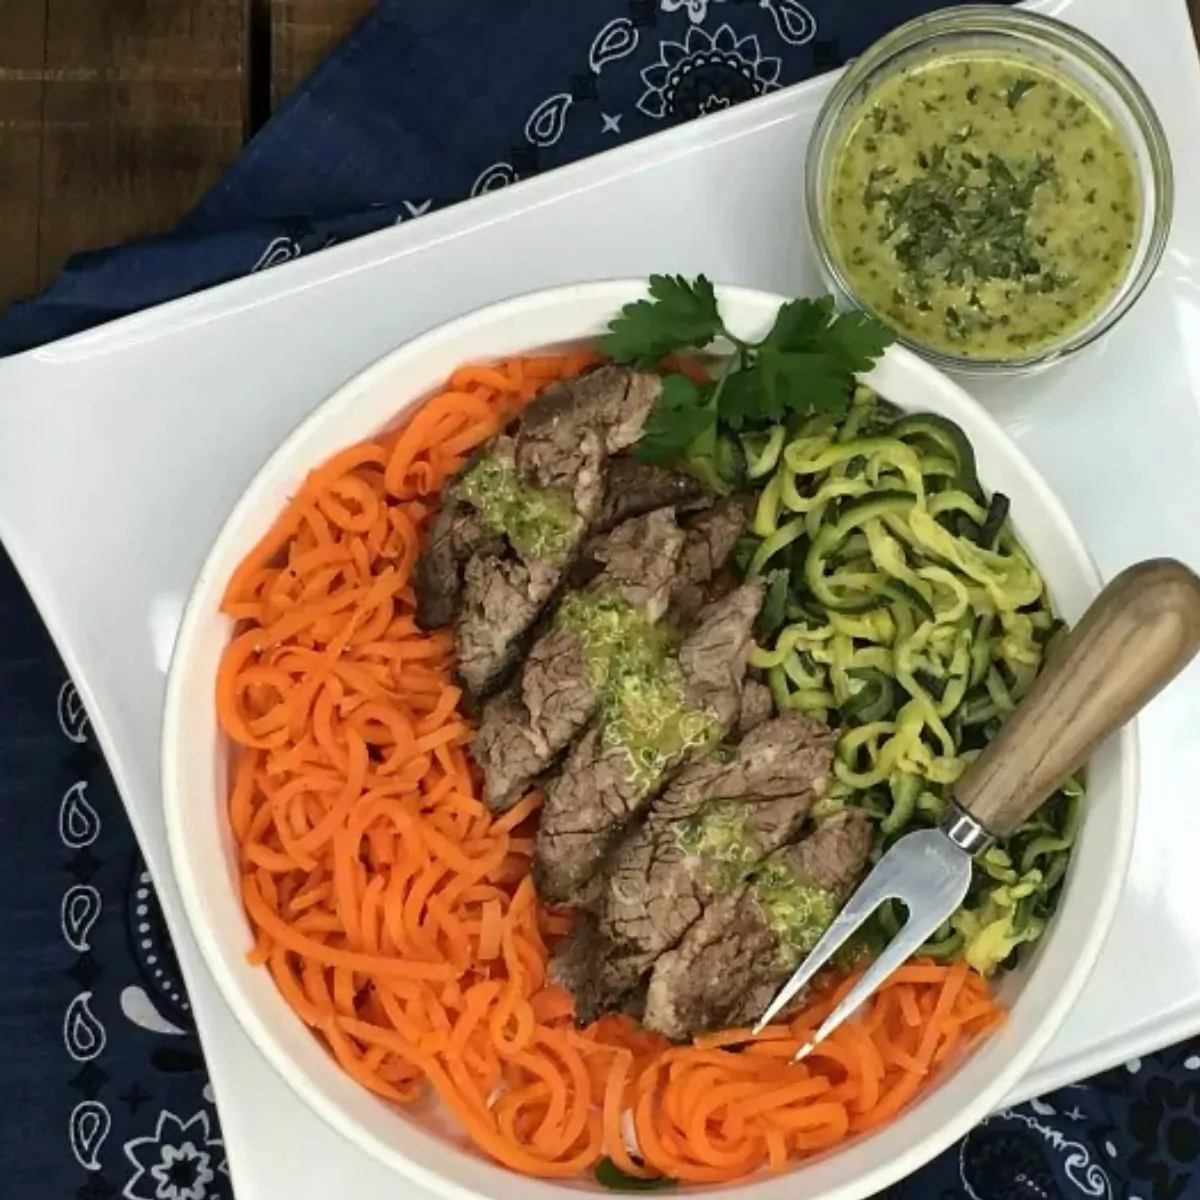 grilled steak with homemade chimichurri sauce on top of zoodles.